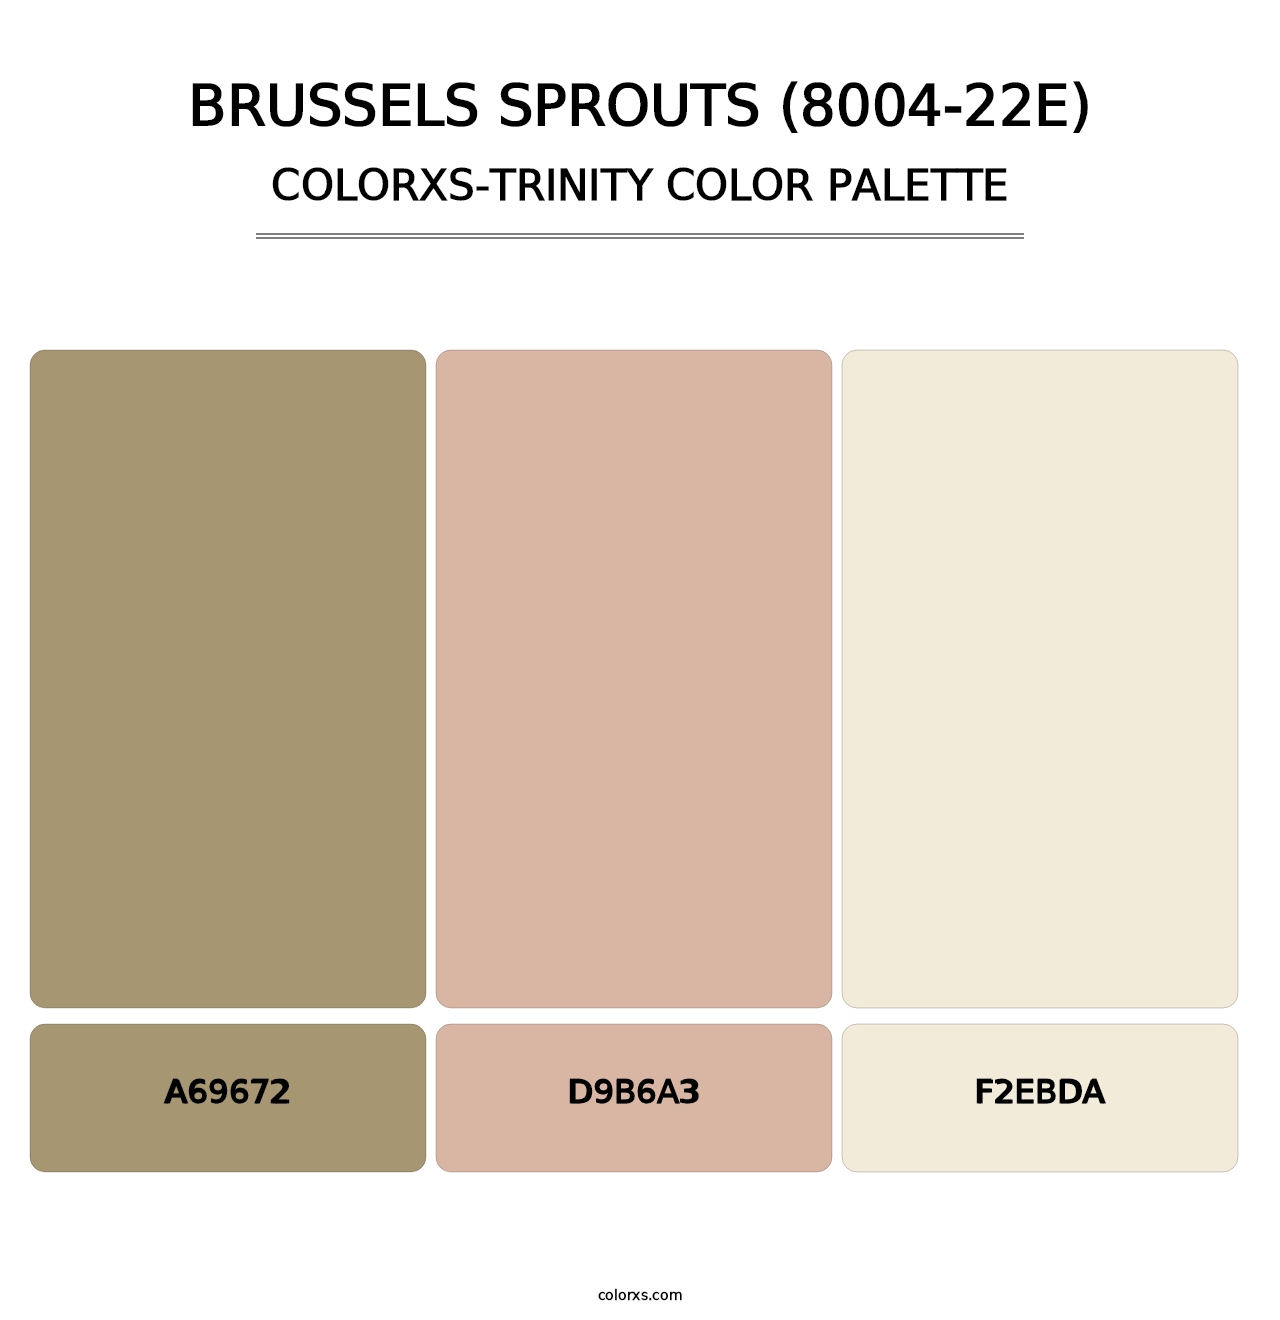 Brussels Sprouts (8004-22E) - Colorxs Trinity Palette